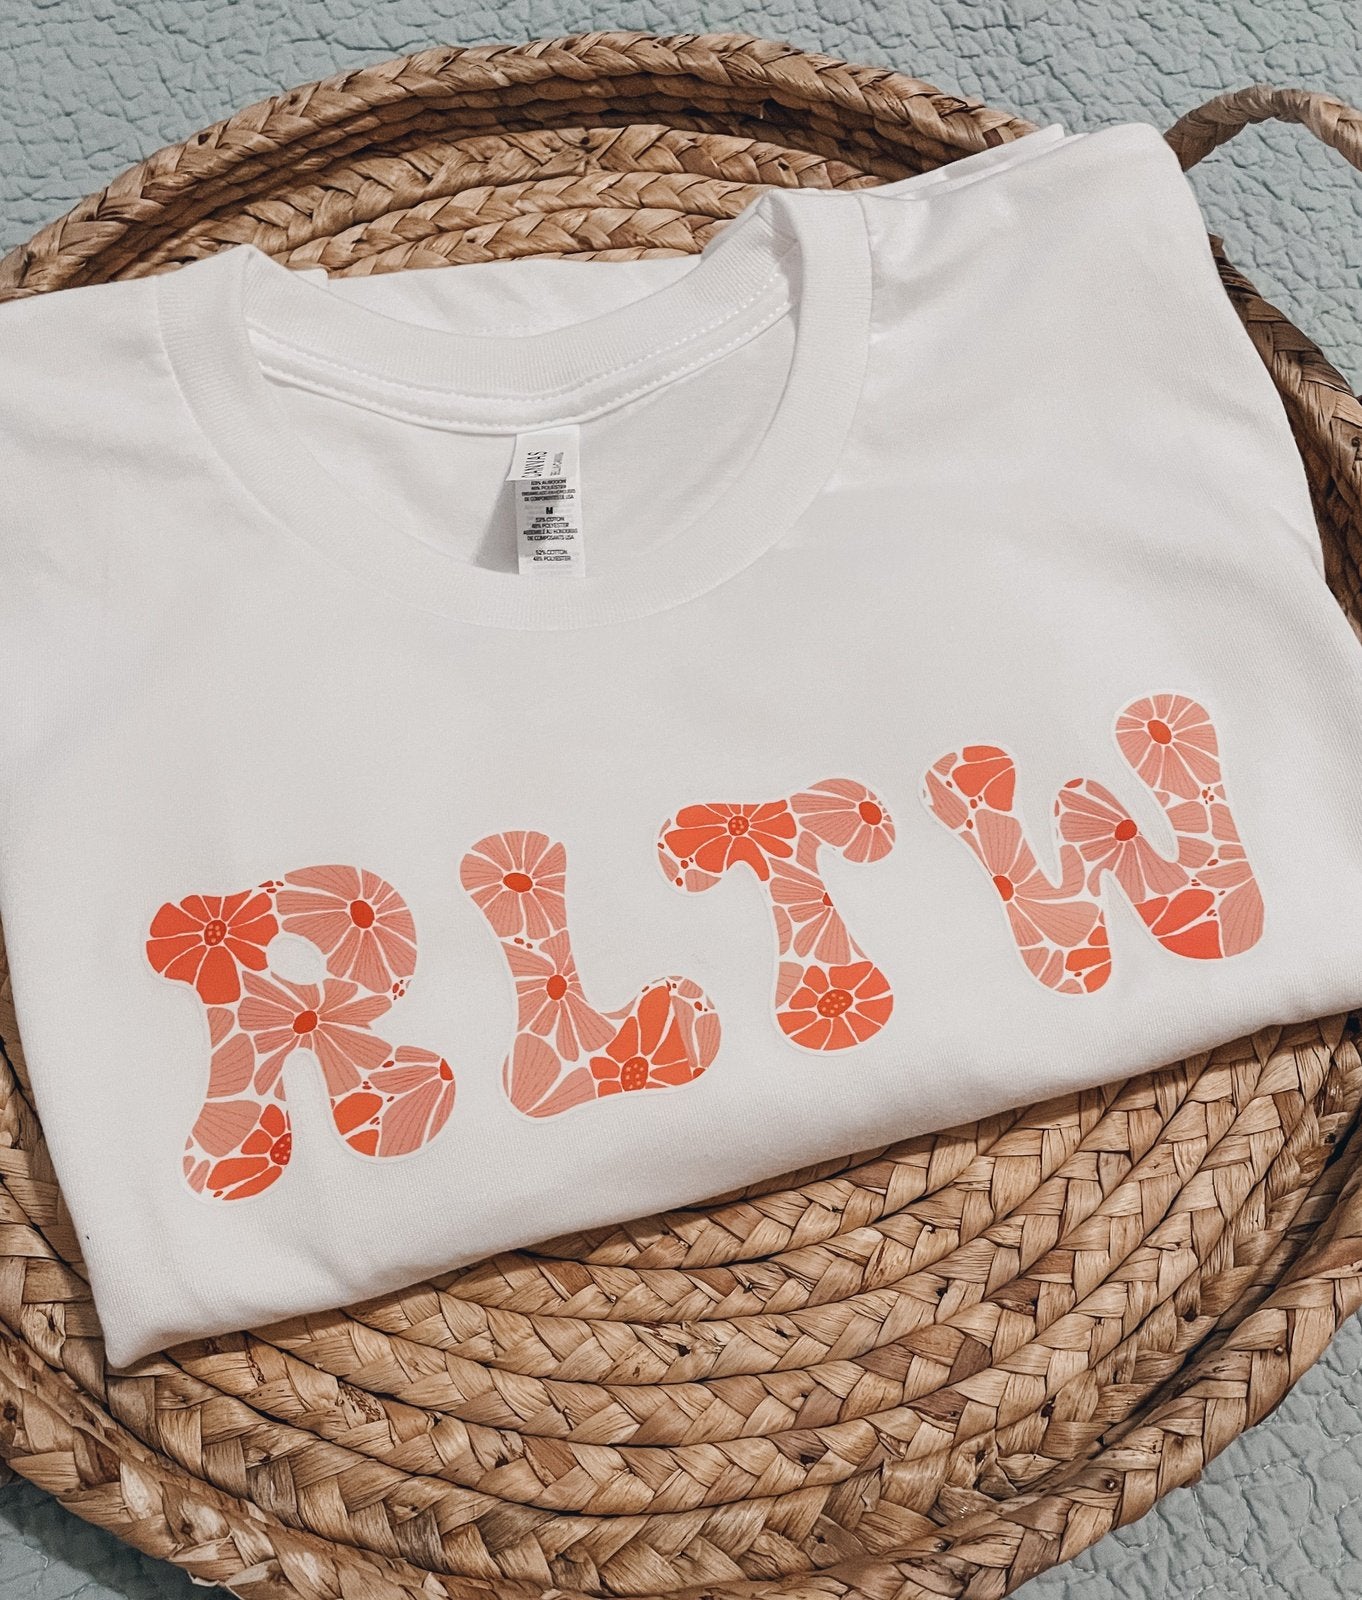 Pink floral RLTW design on a white tee